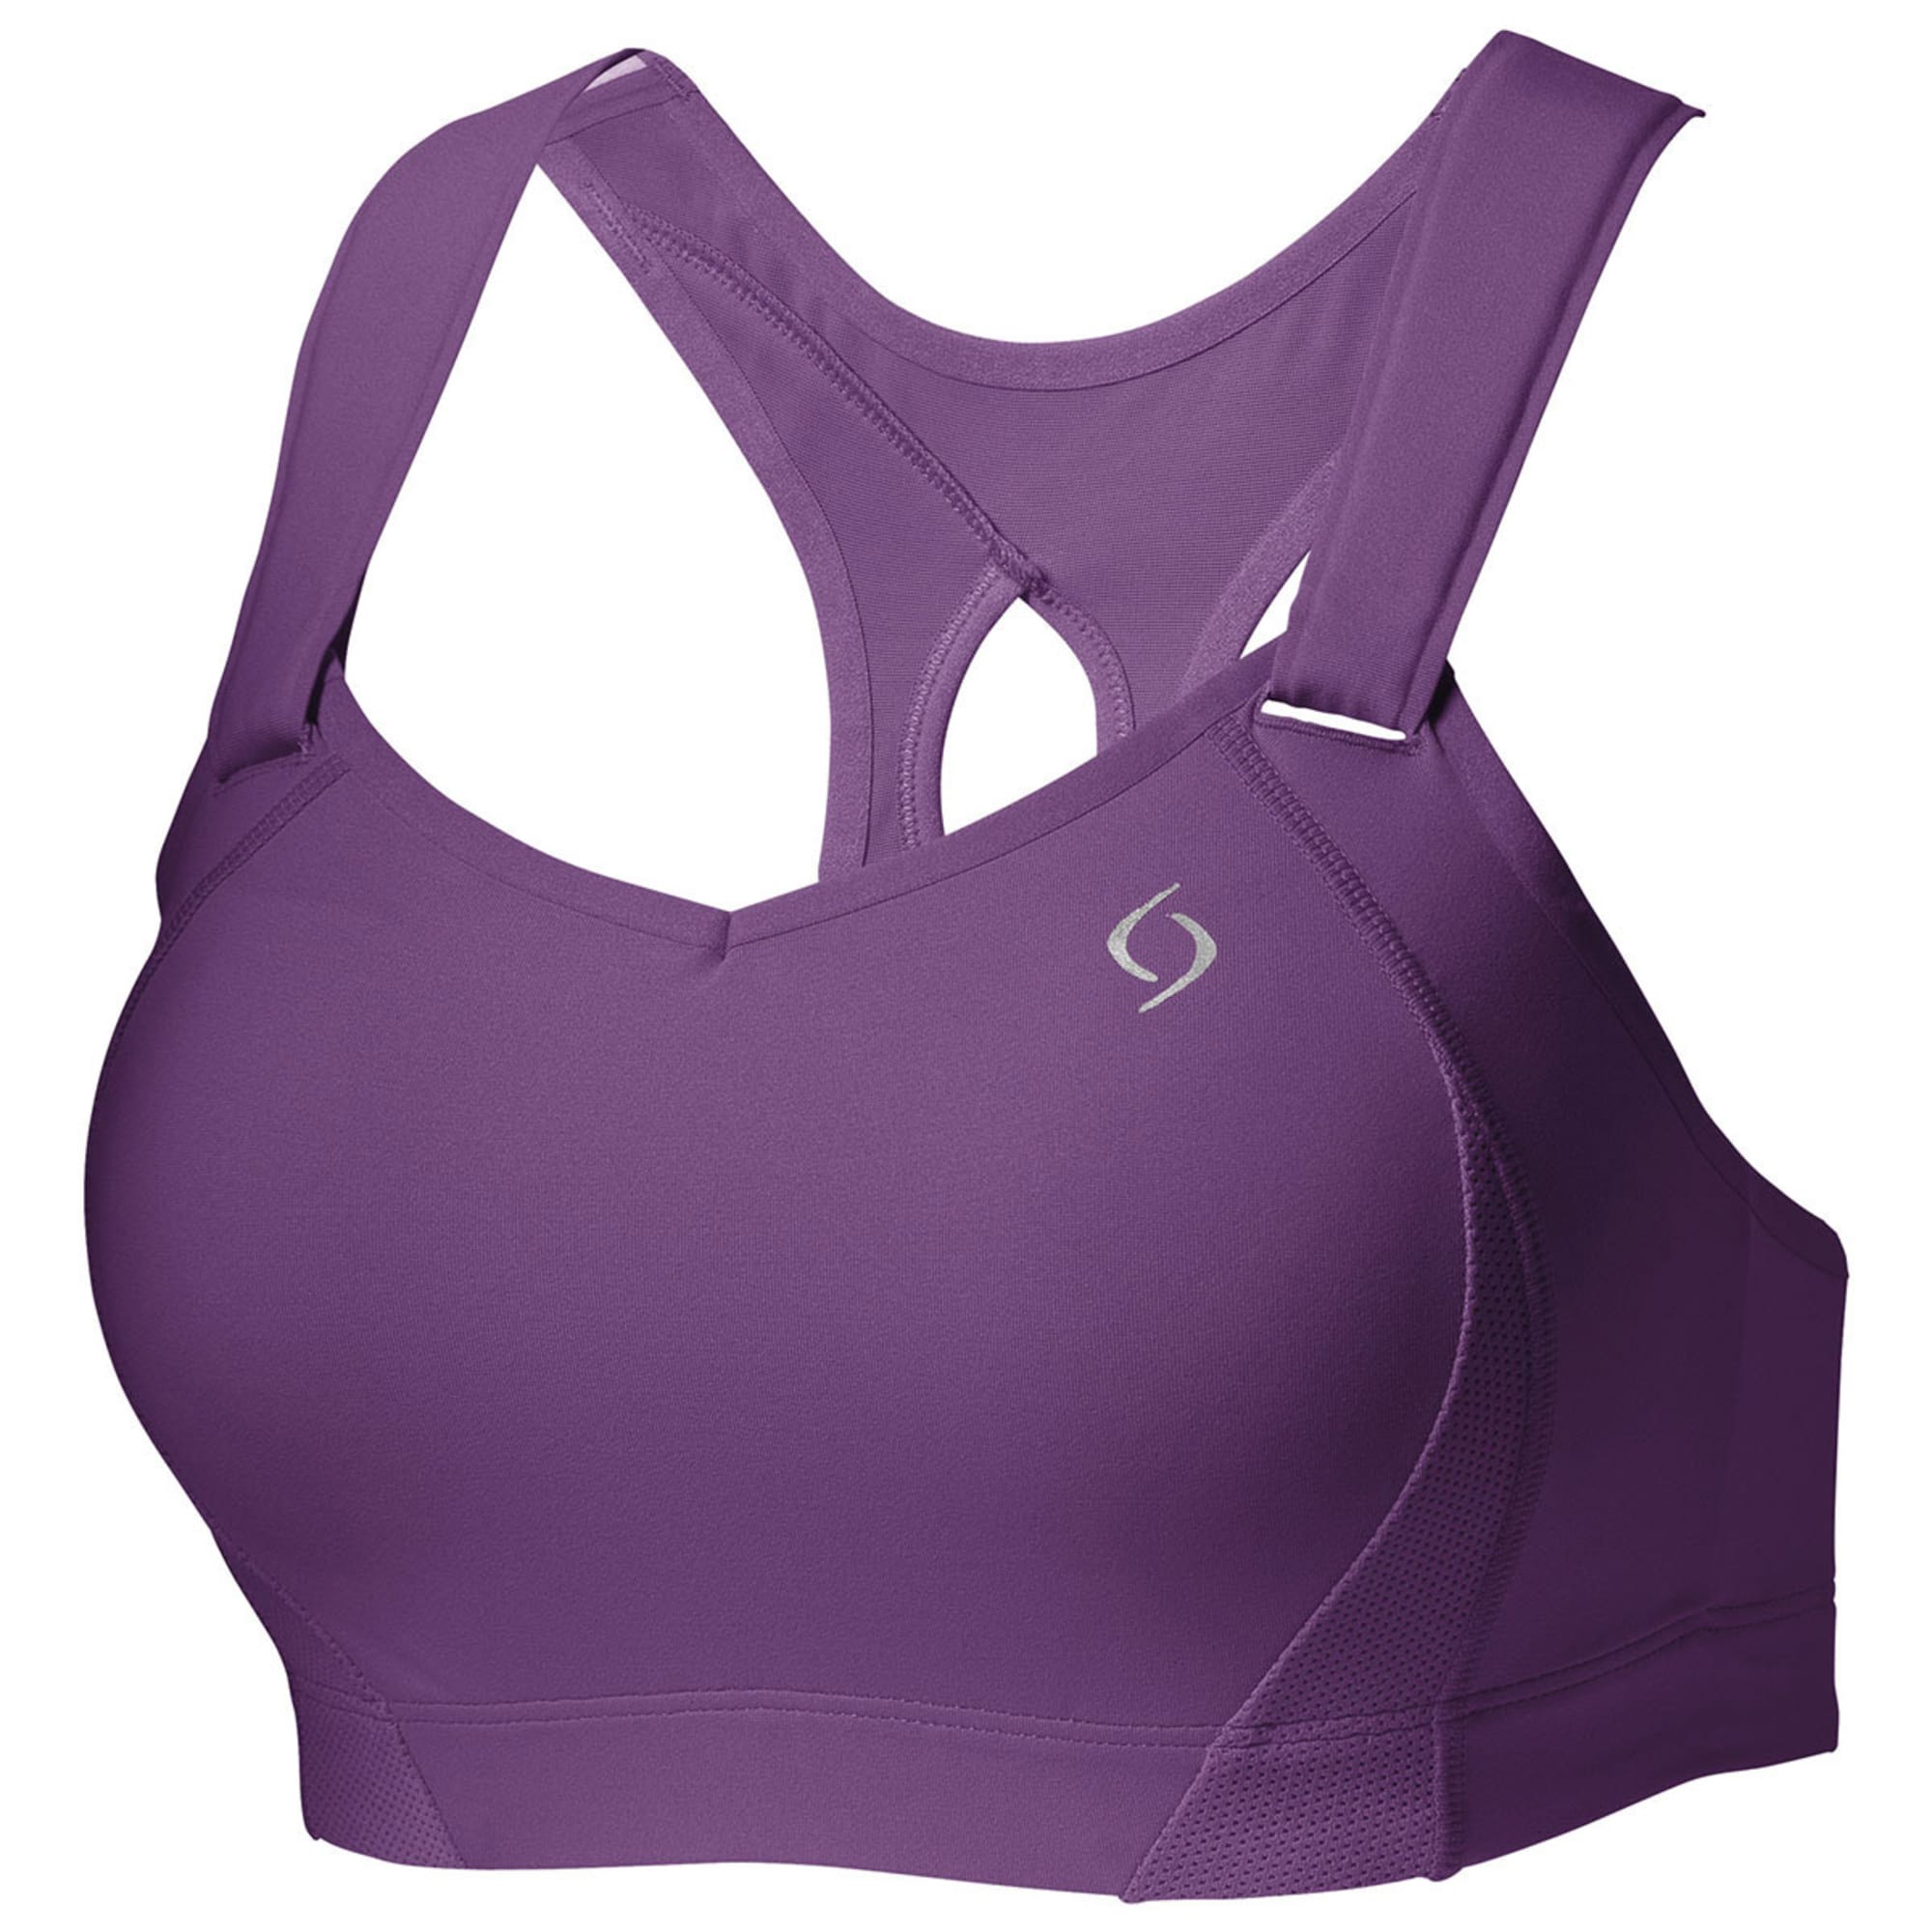 H M H & M - Medium Support Sports Bra In DryMove™ - Turquoise for Women